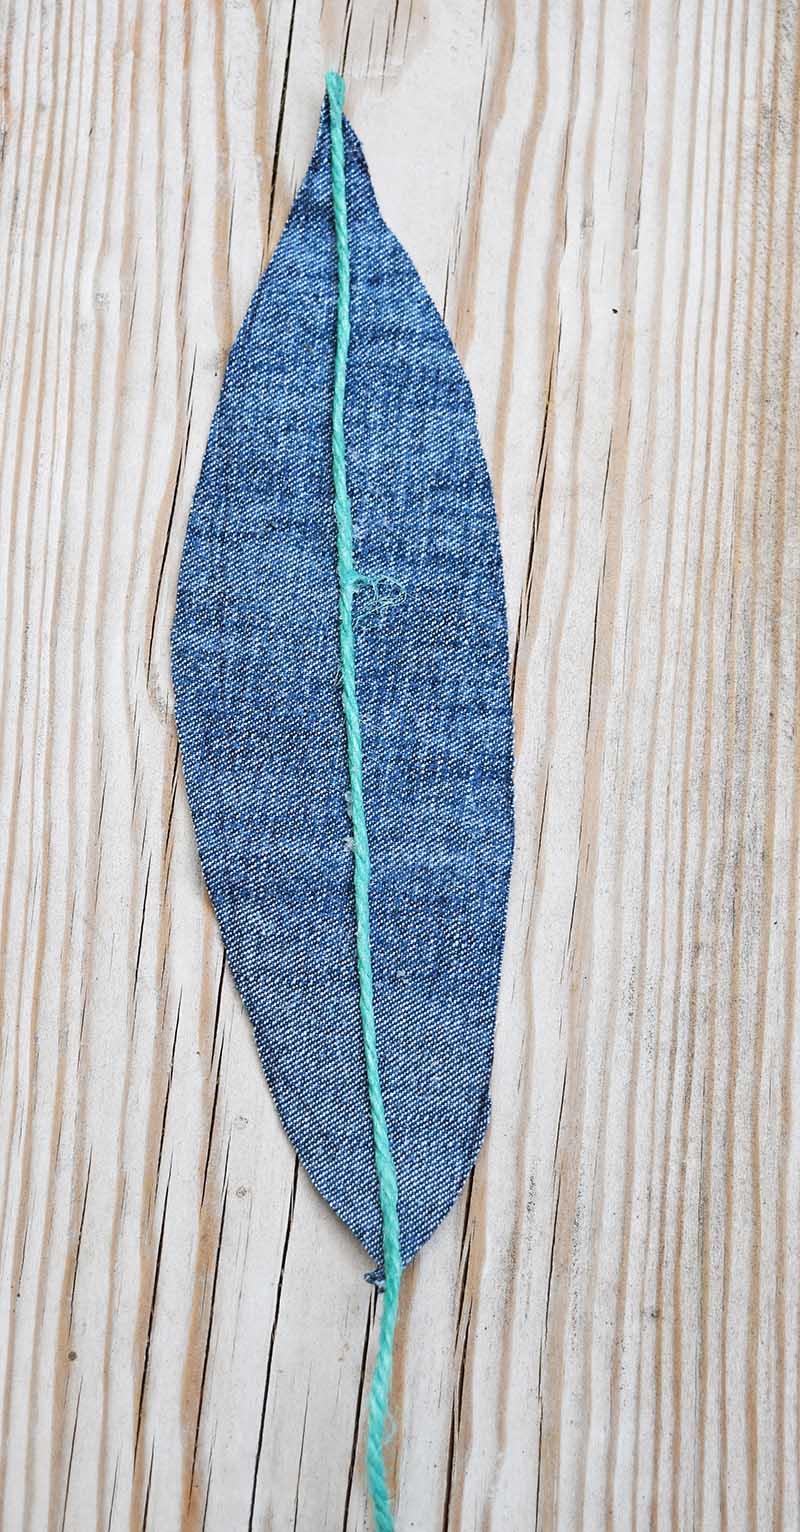 Sticking on the twine spine to denim feather.